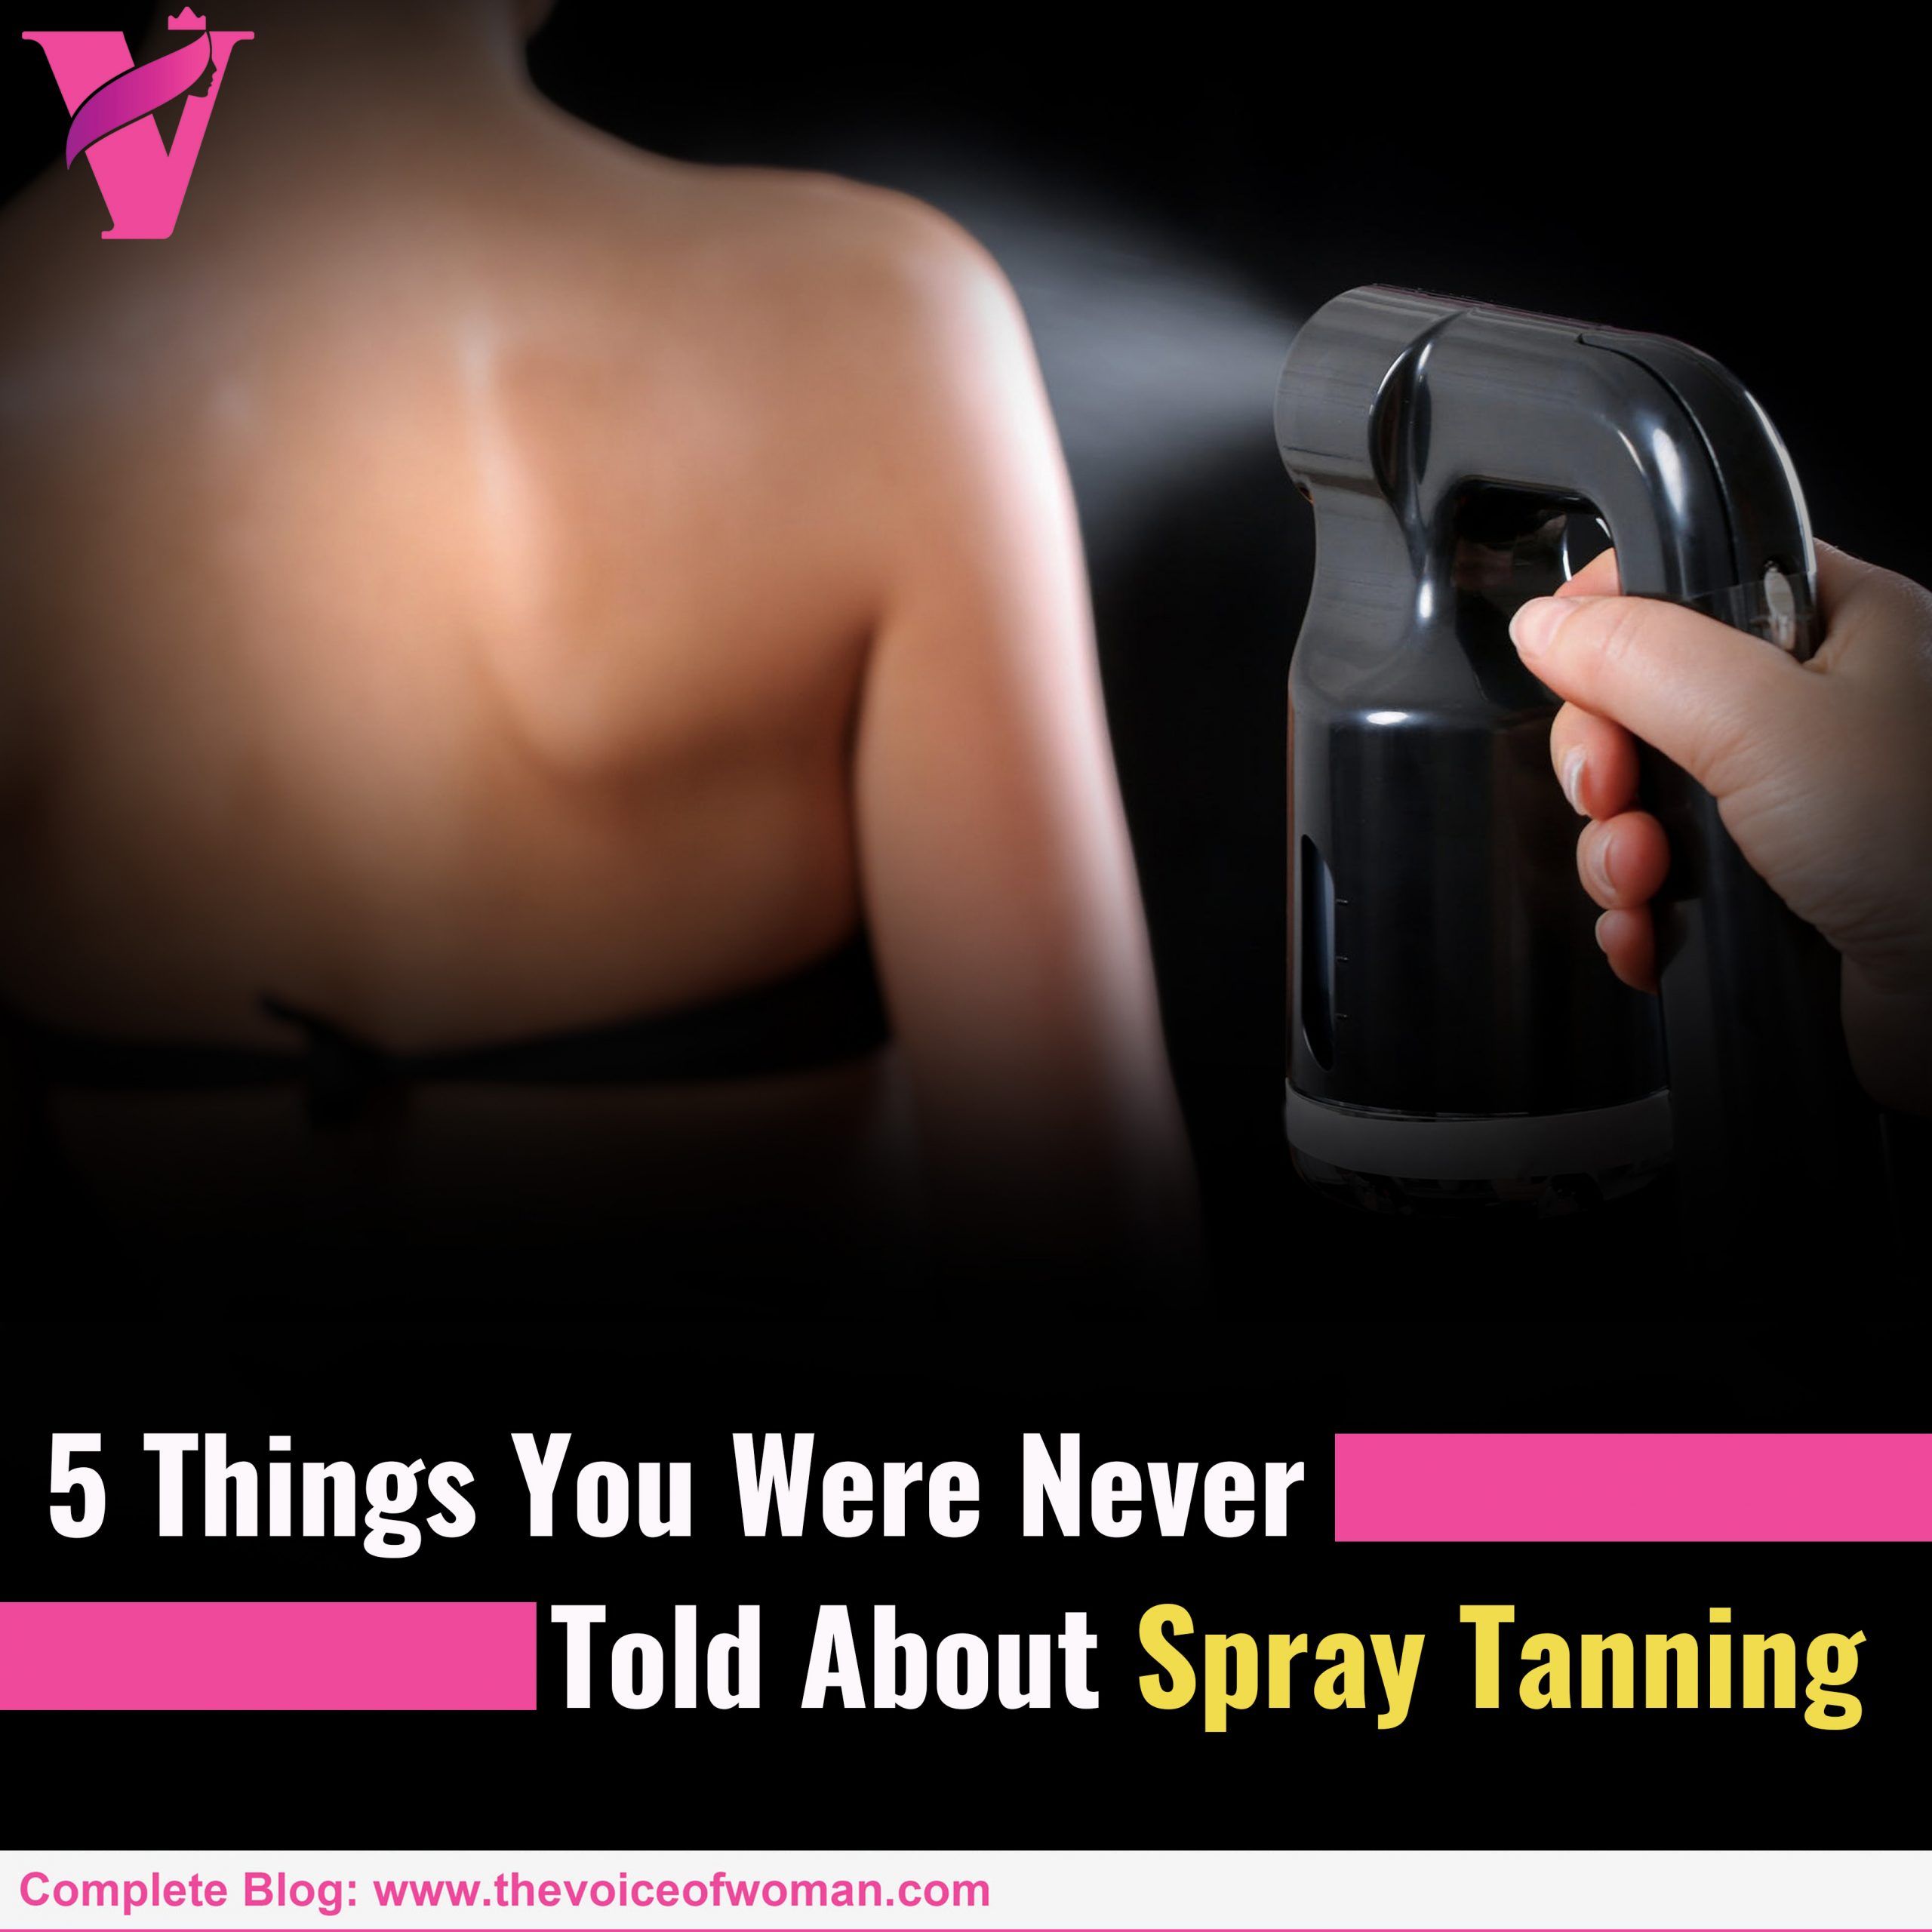 About Spray Tanning